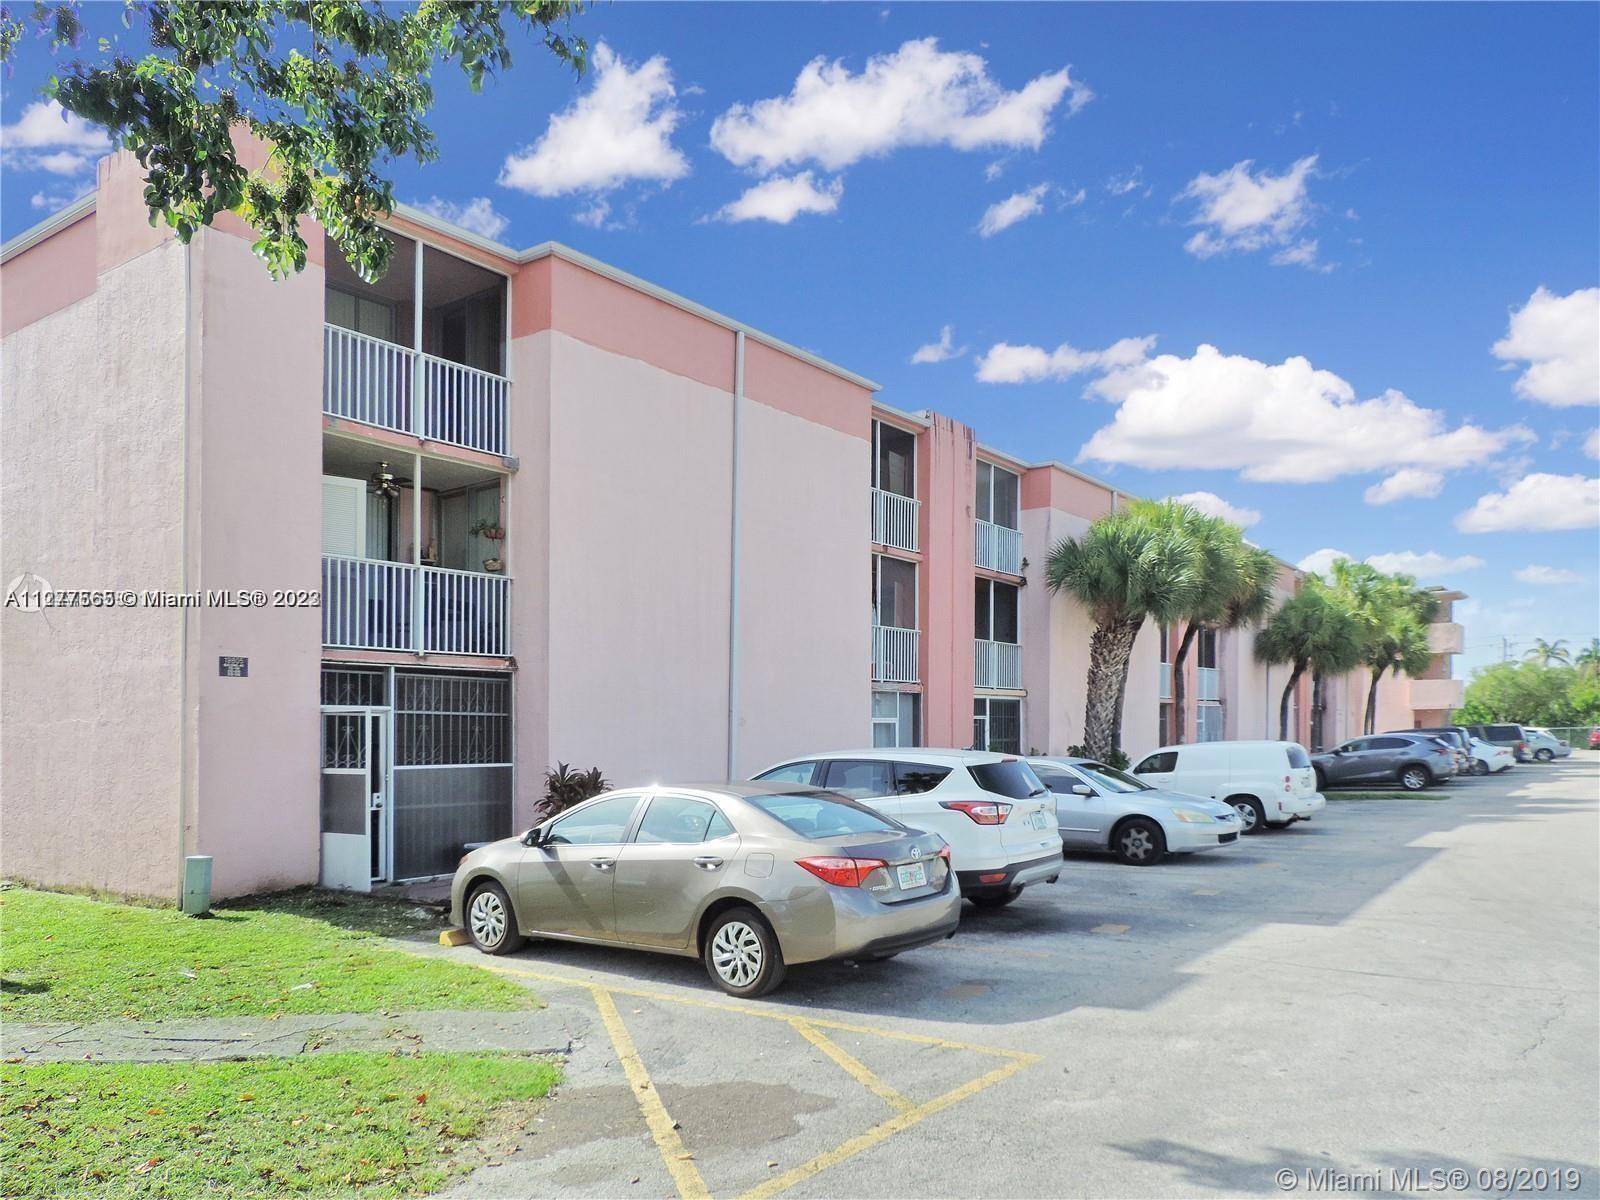 Great for investors 2/2 800 SQ FT, Tile throughout with a balcony and storage room west of US 1 high demand rental area. A+ tenants at $1400.00 with a last and security deposit SPECIAL ASSESSMENT 120.90 MONTHLY.